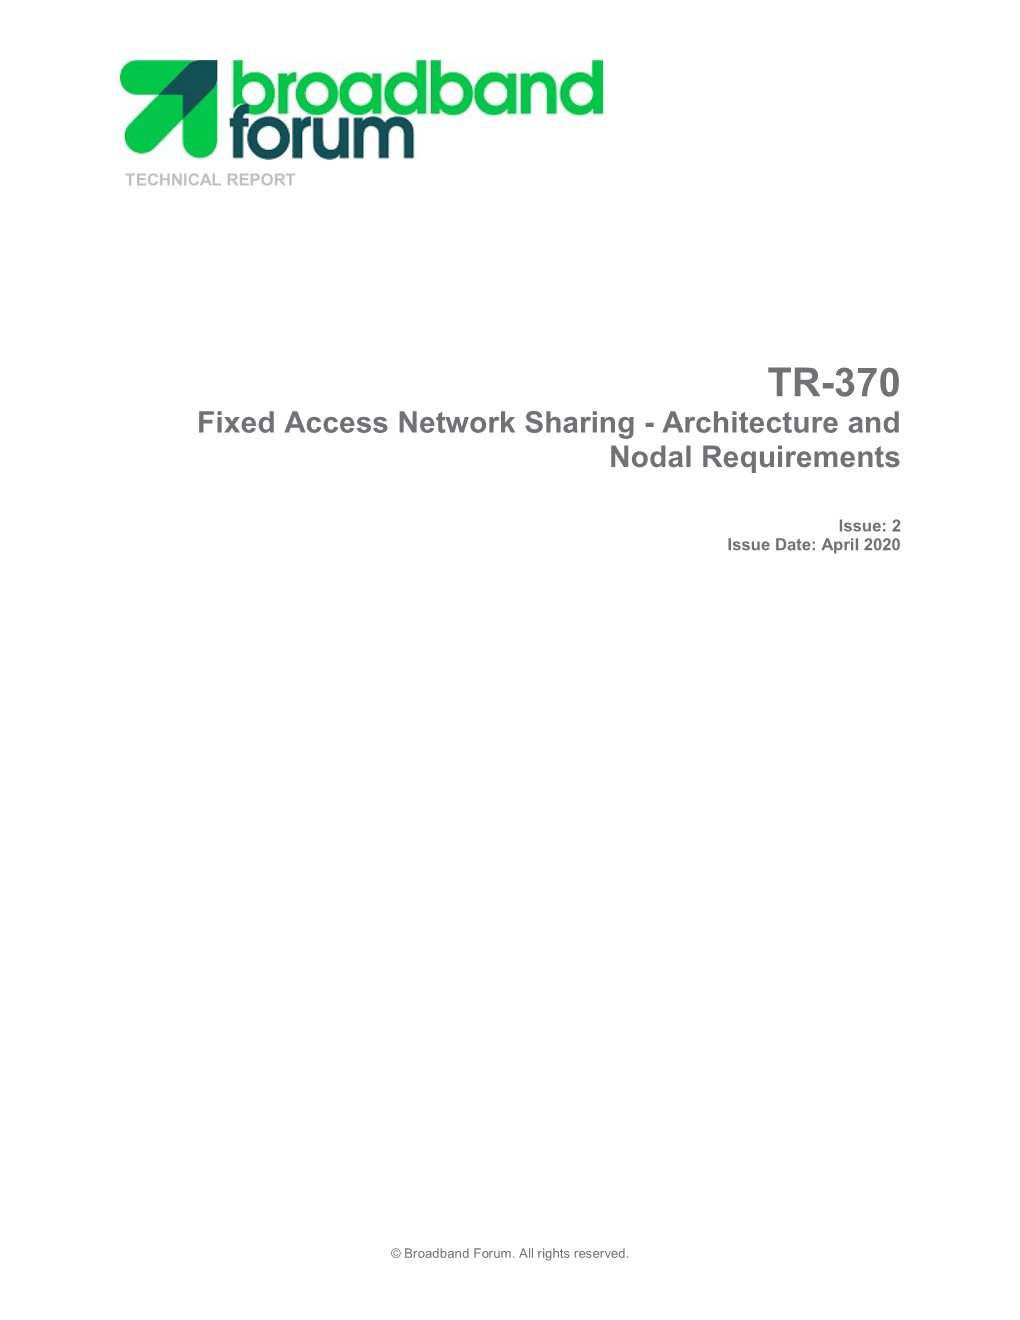 Fixed Access Network Sharing - Architecture and Nodal Requirements